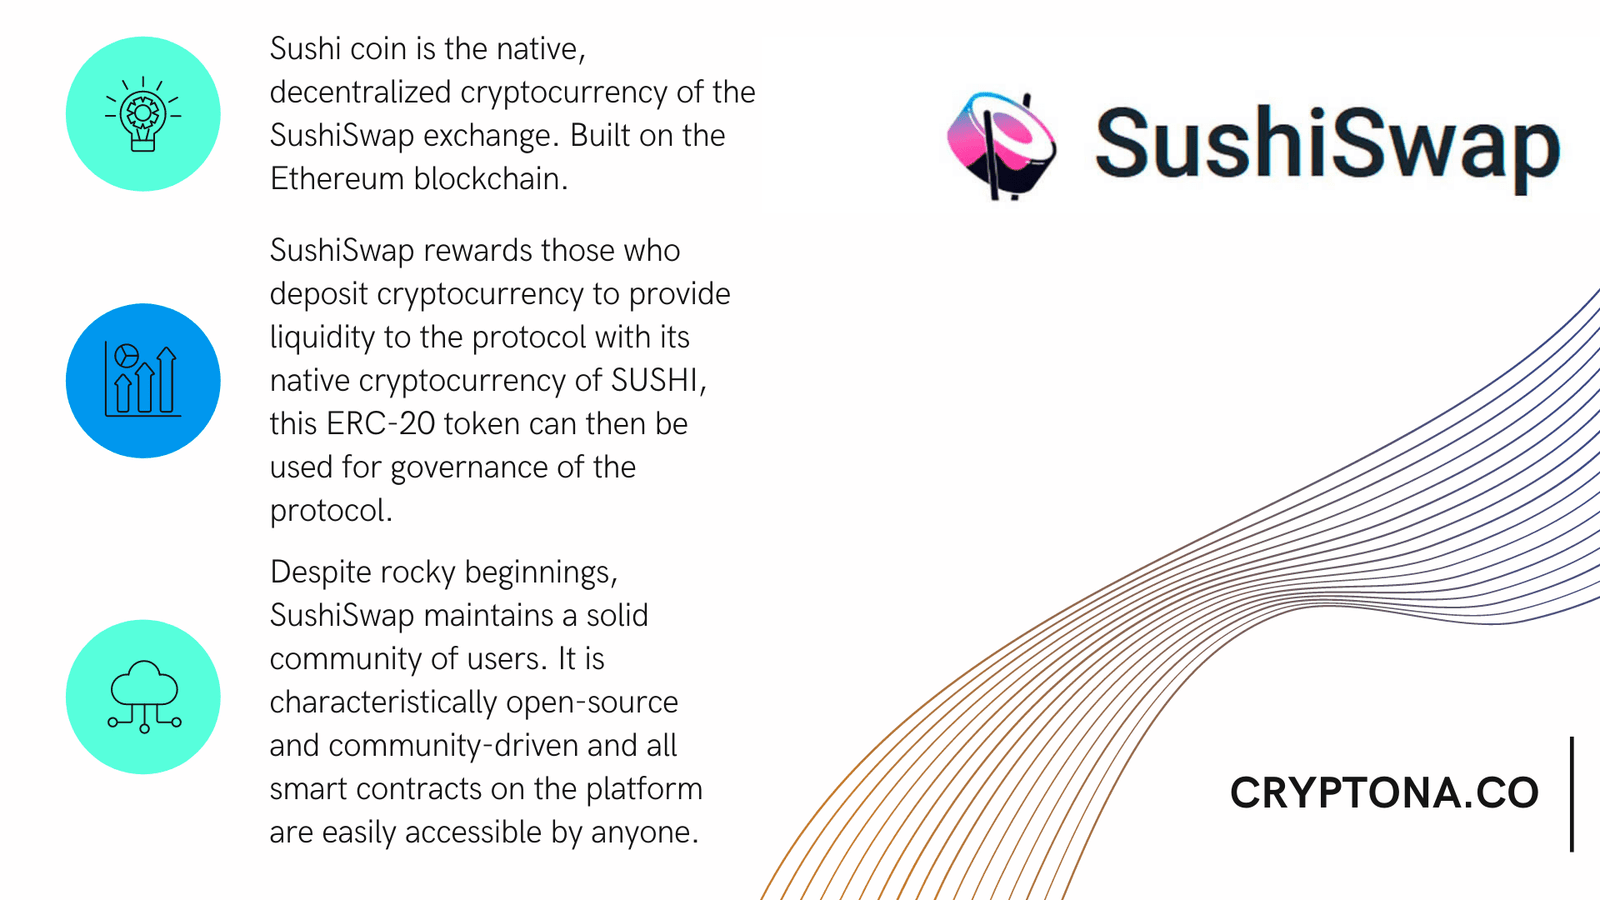 What is Sushi Coin?